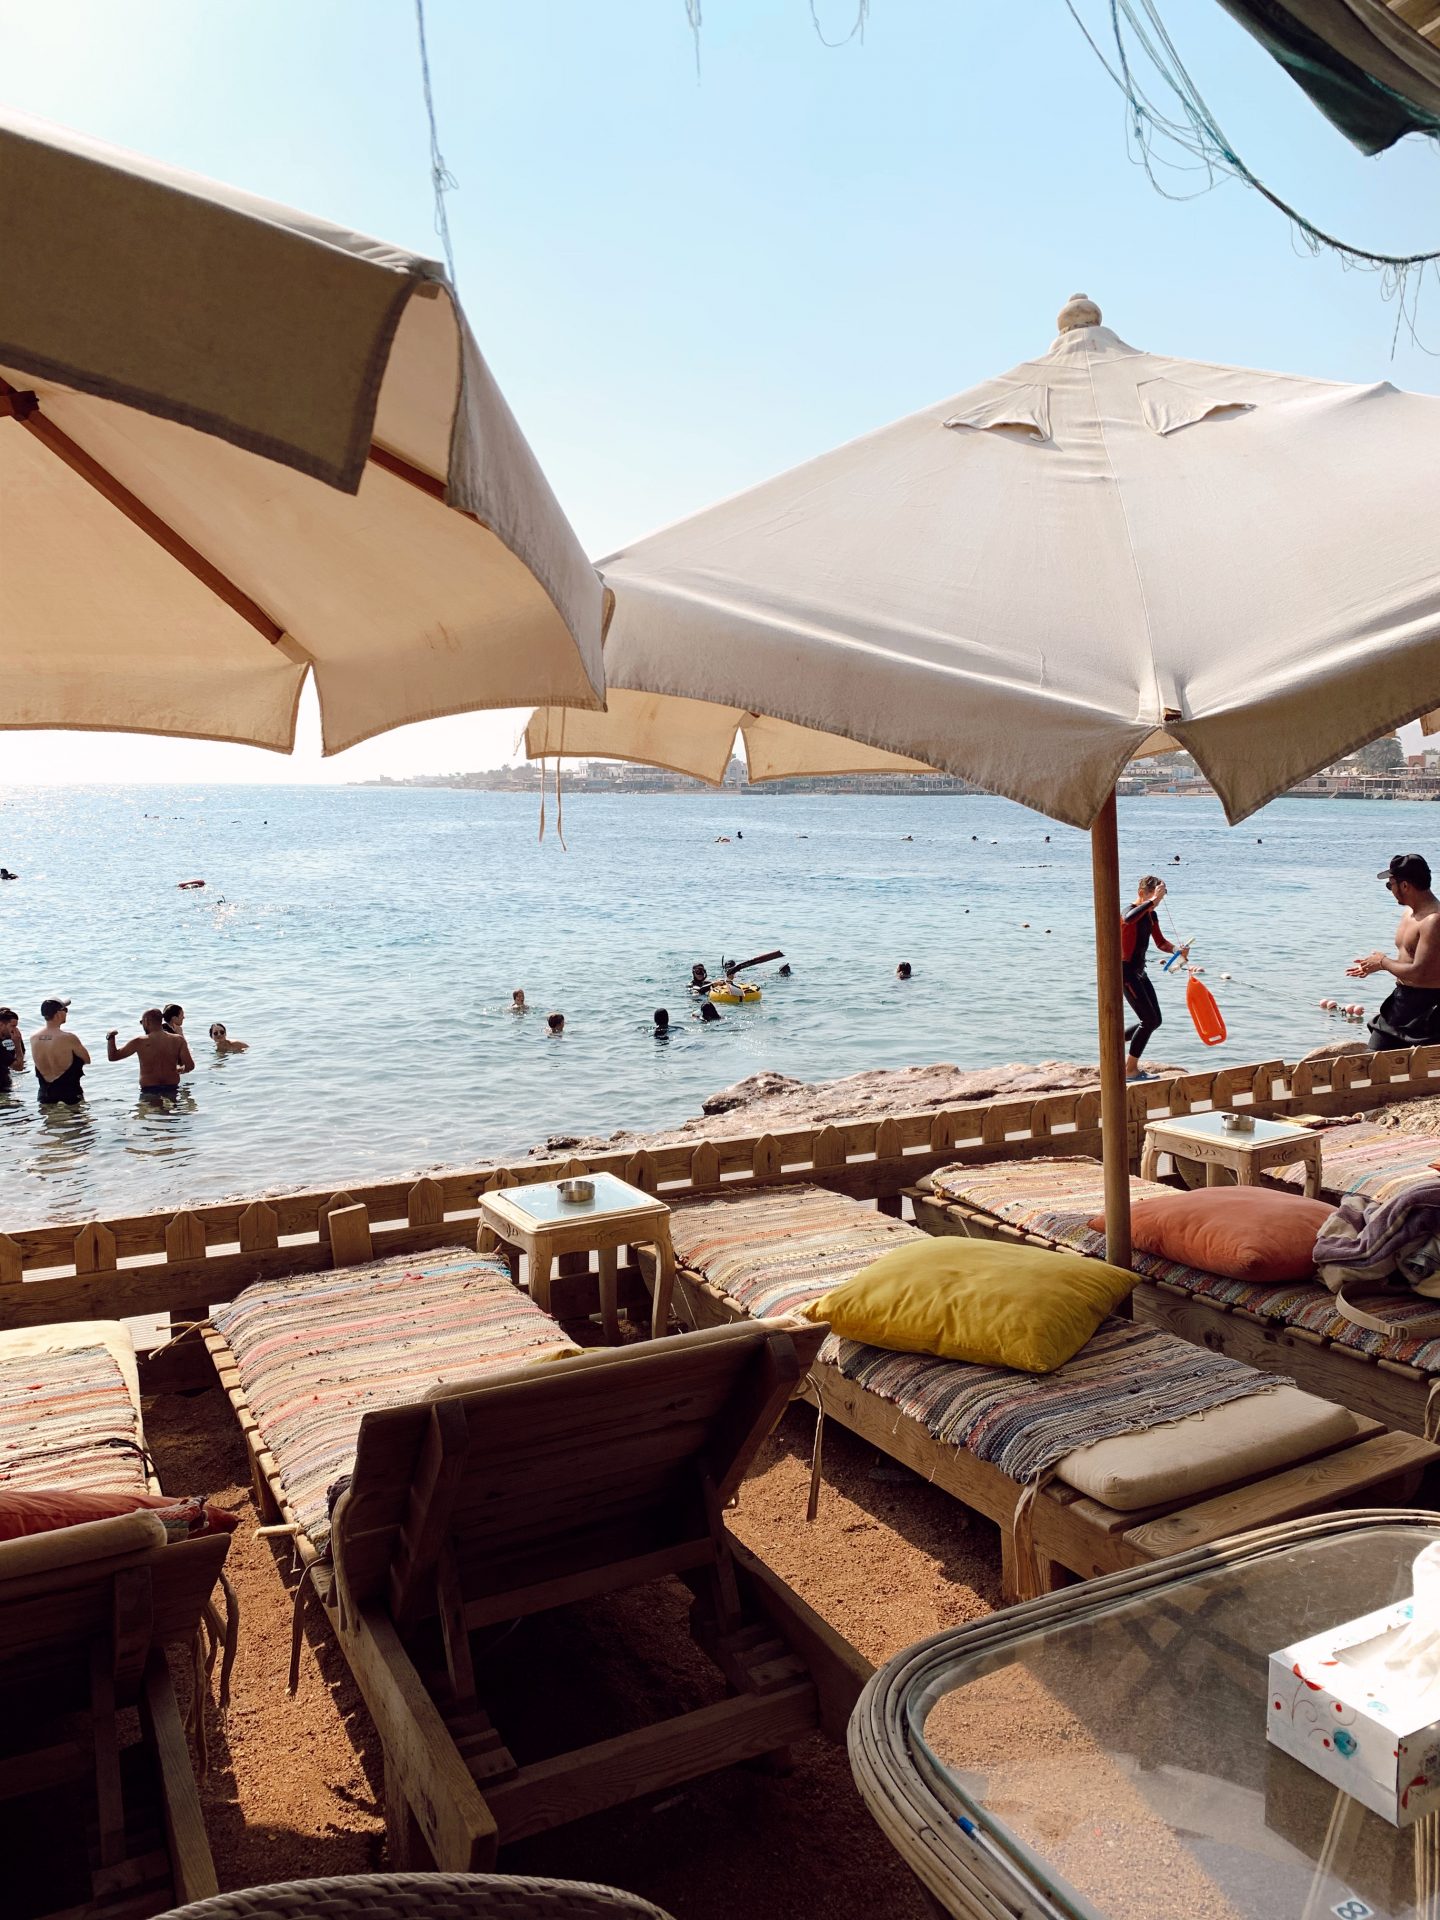 An area with lounge chairs and umbrellas on the beach in Dahab, Egypt by the Red Sea